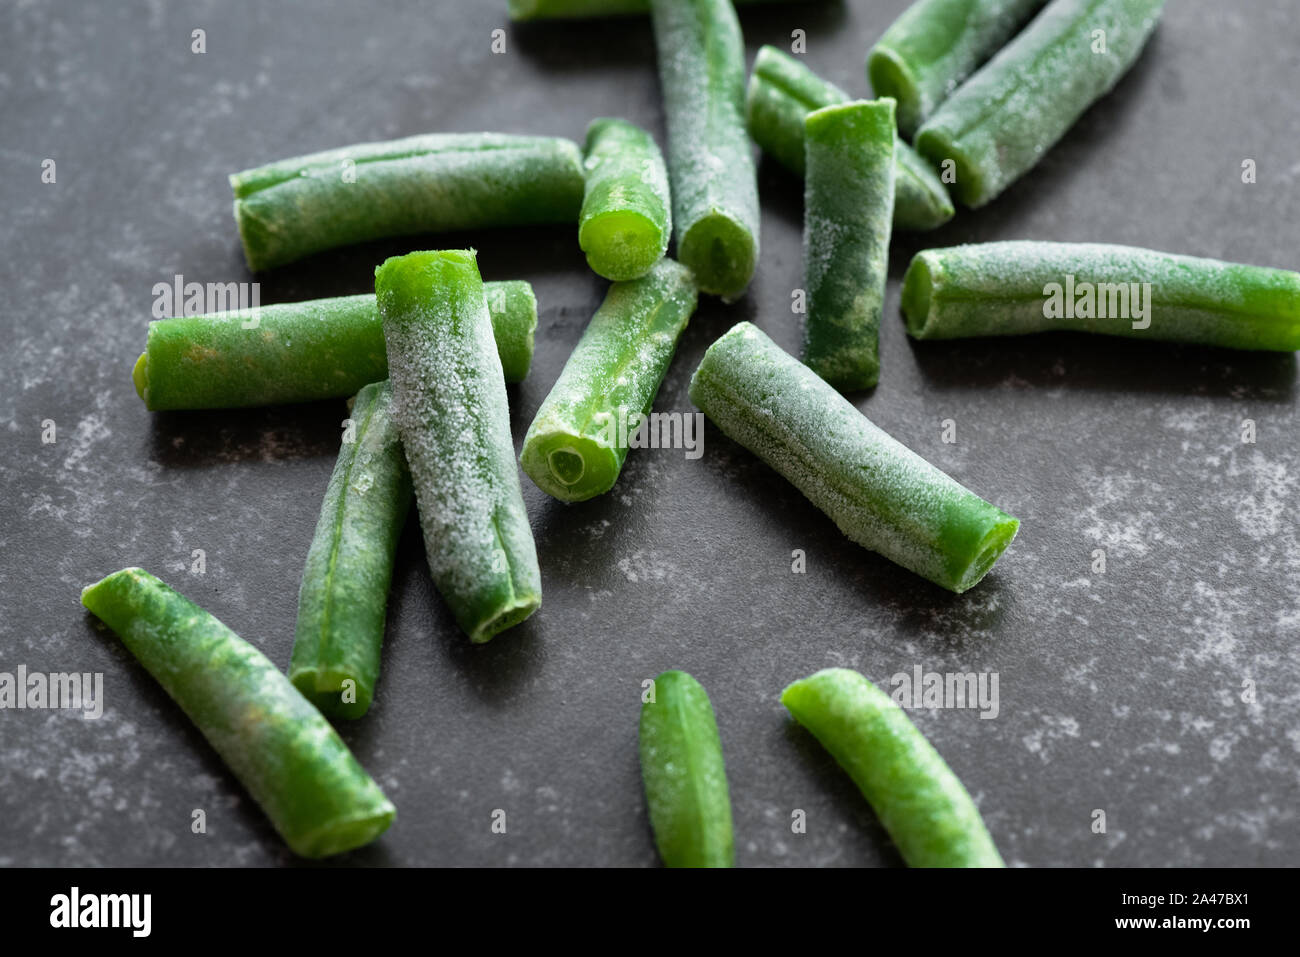 Green beans on a stone cutting board background. Stock Photo